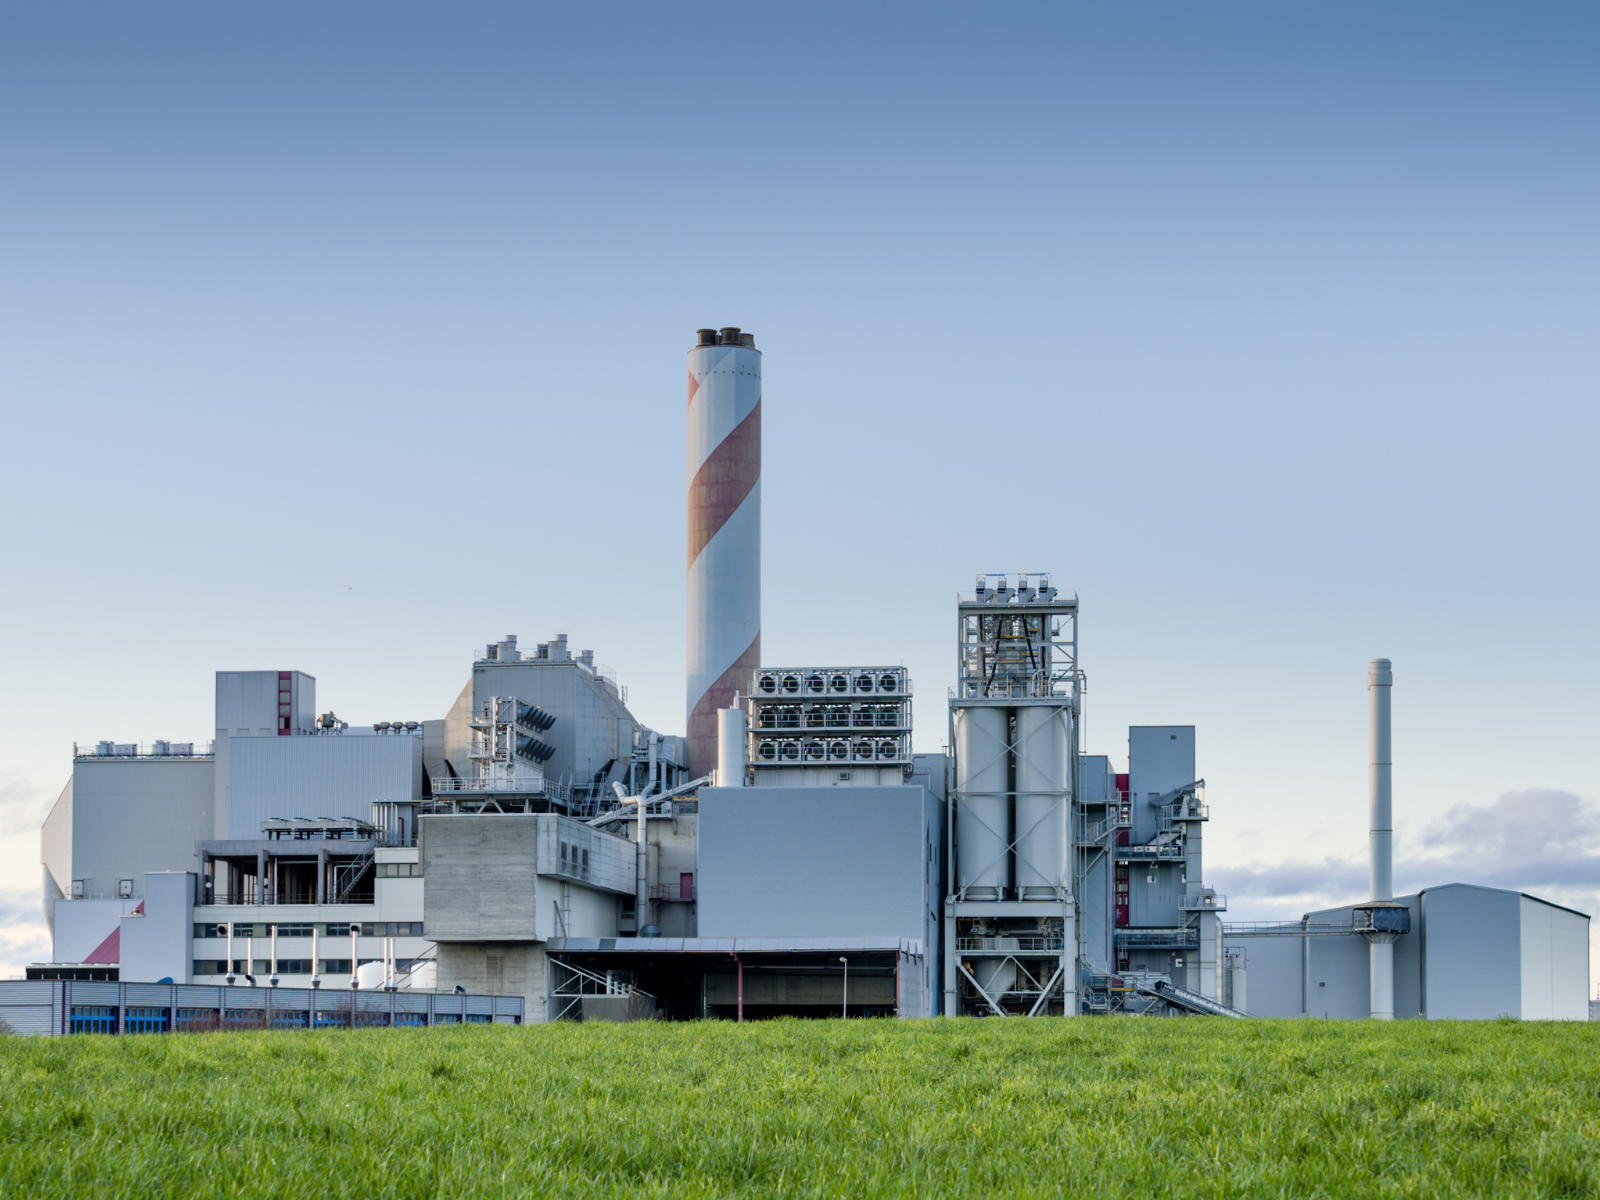 Image of a carbon capture and storage facility.